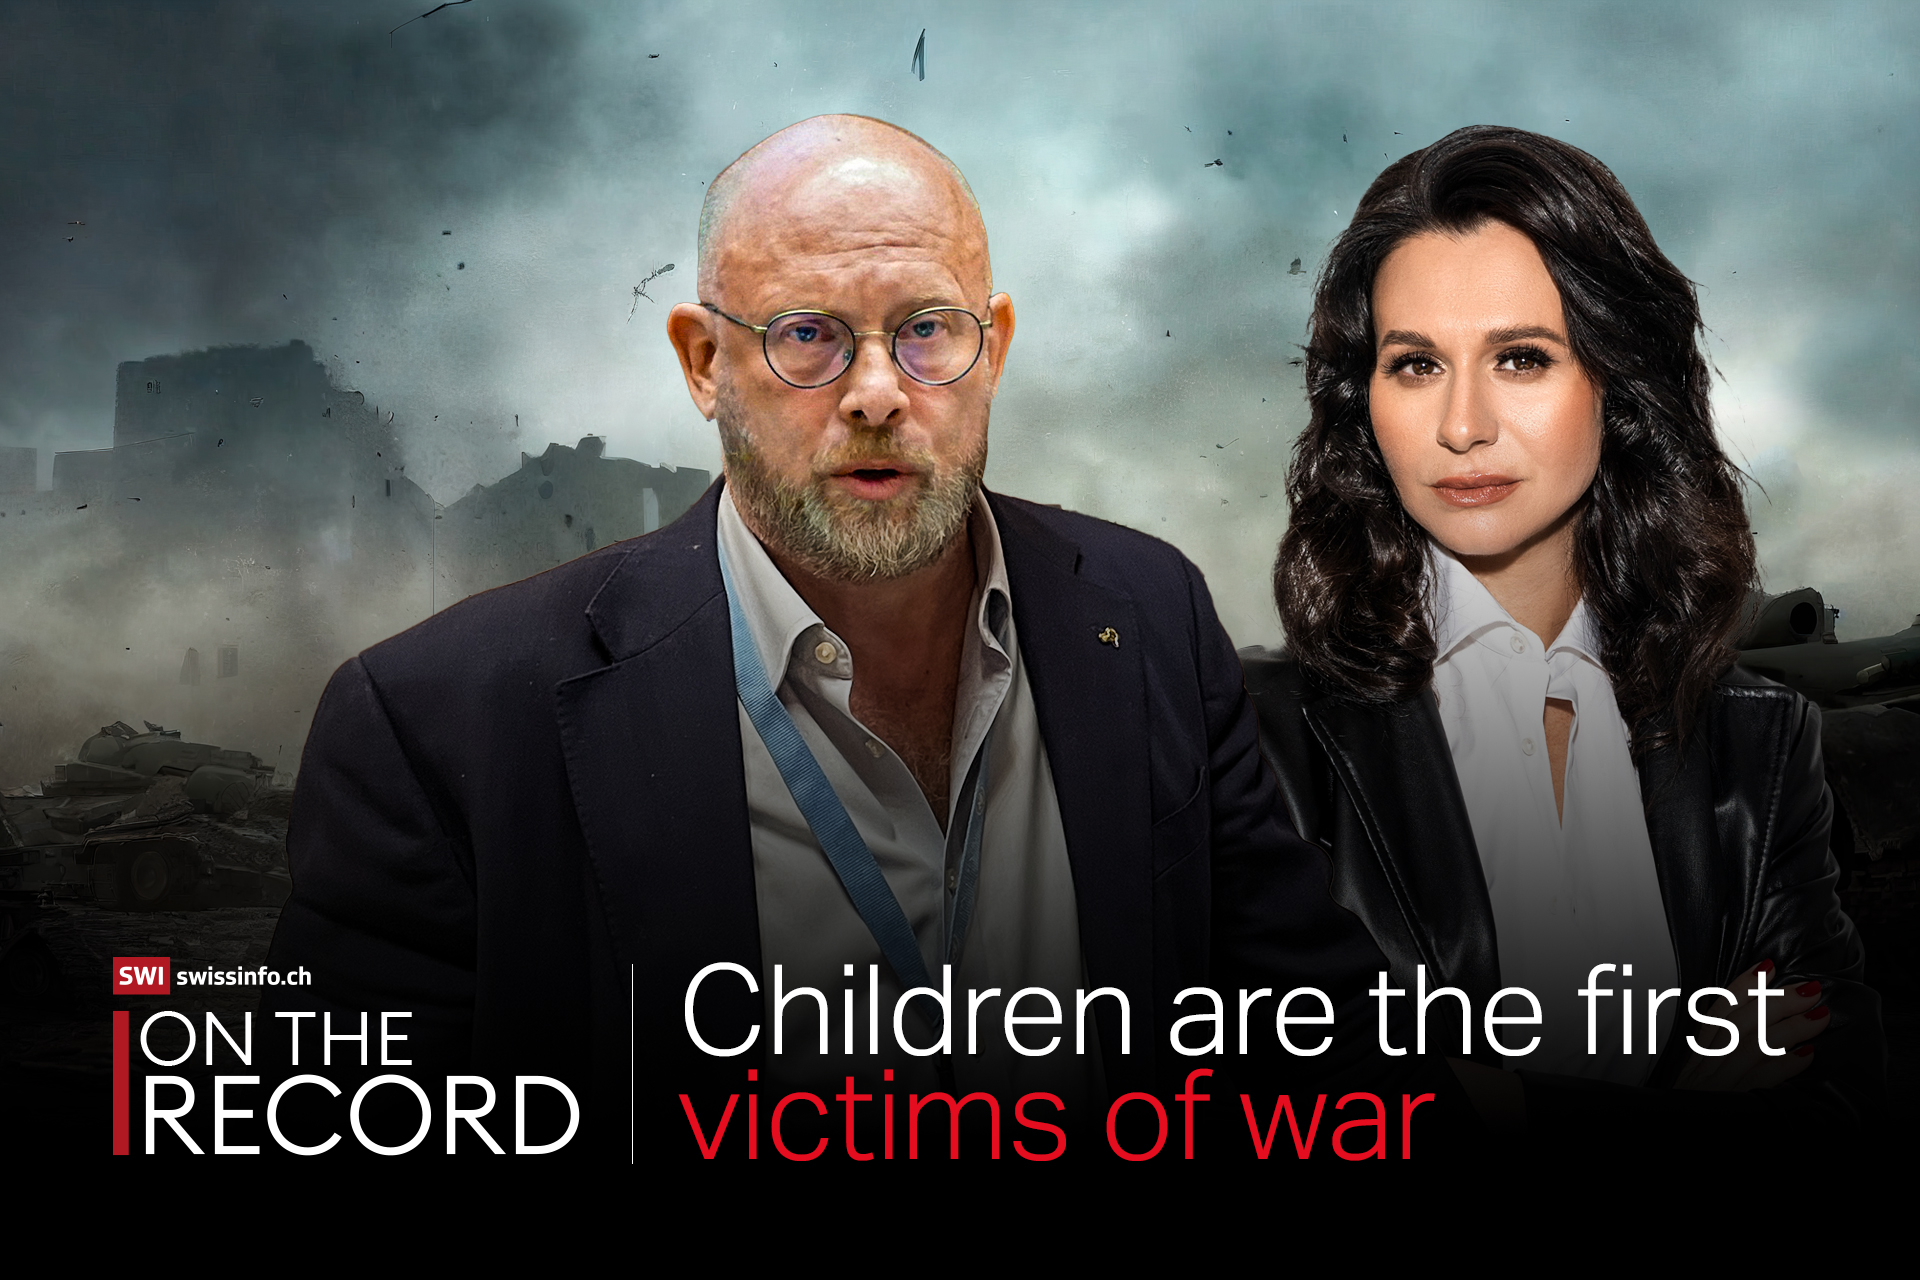 teaser picture featuring a man and a woman for a conversation about child victims of war